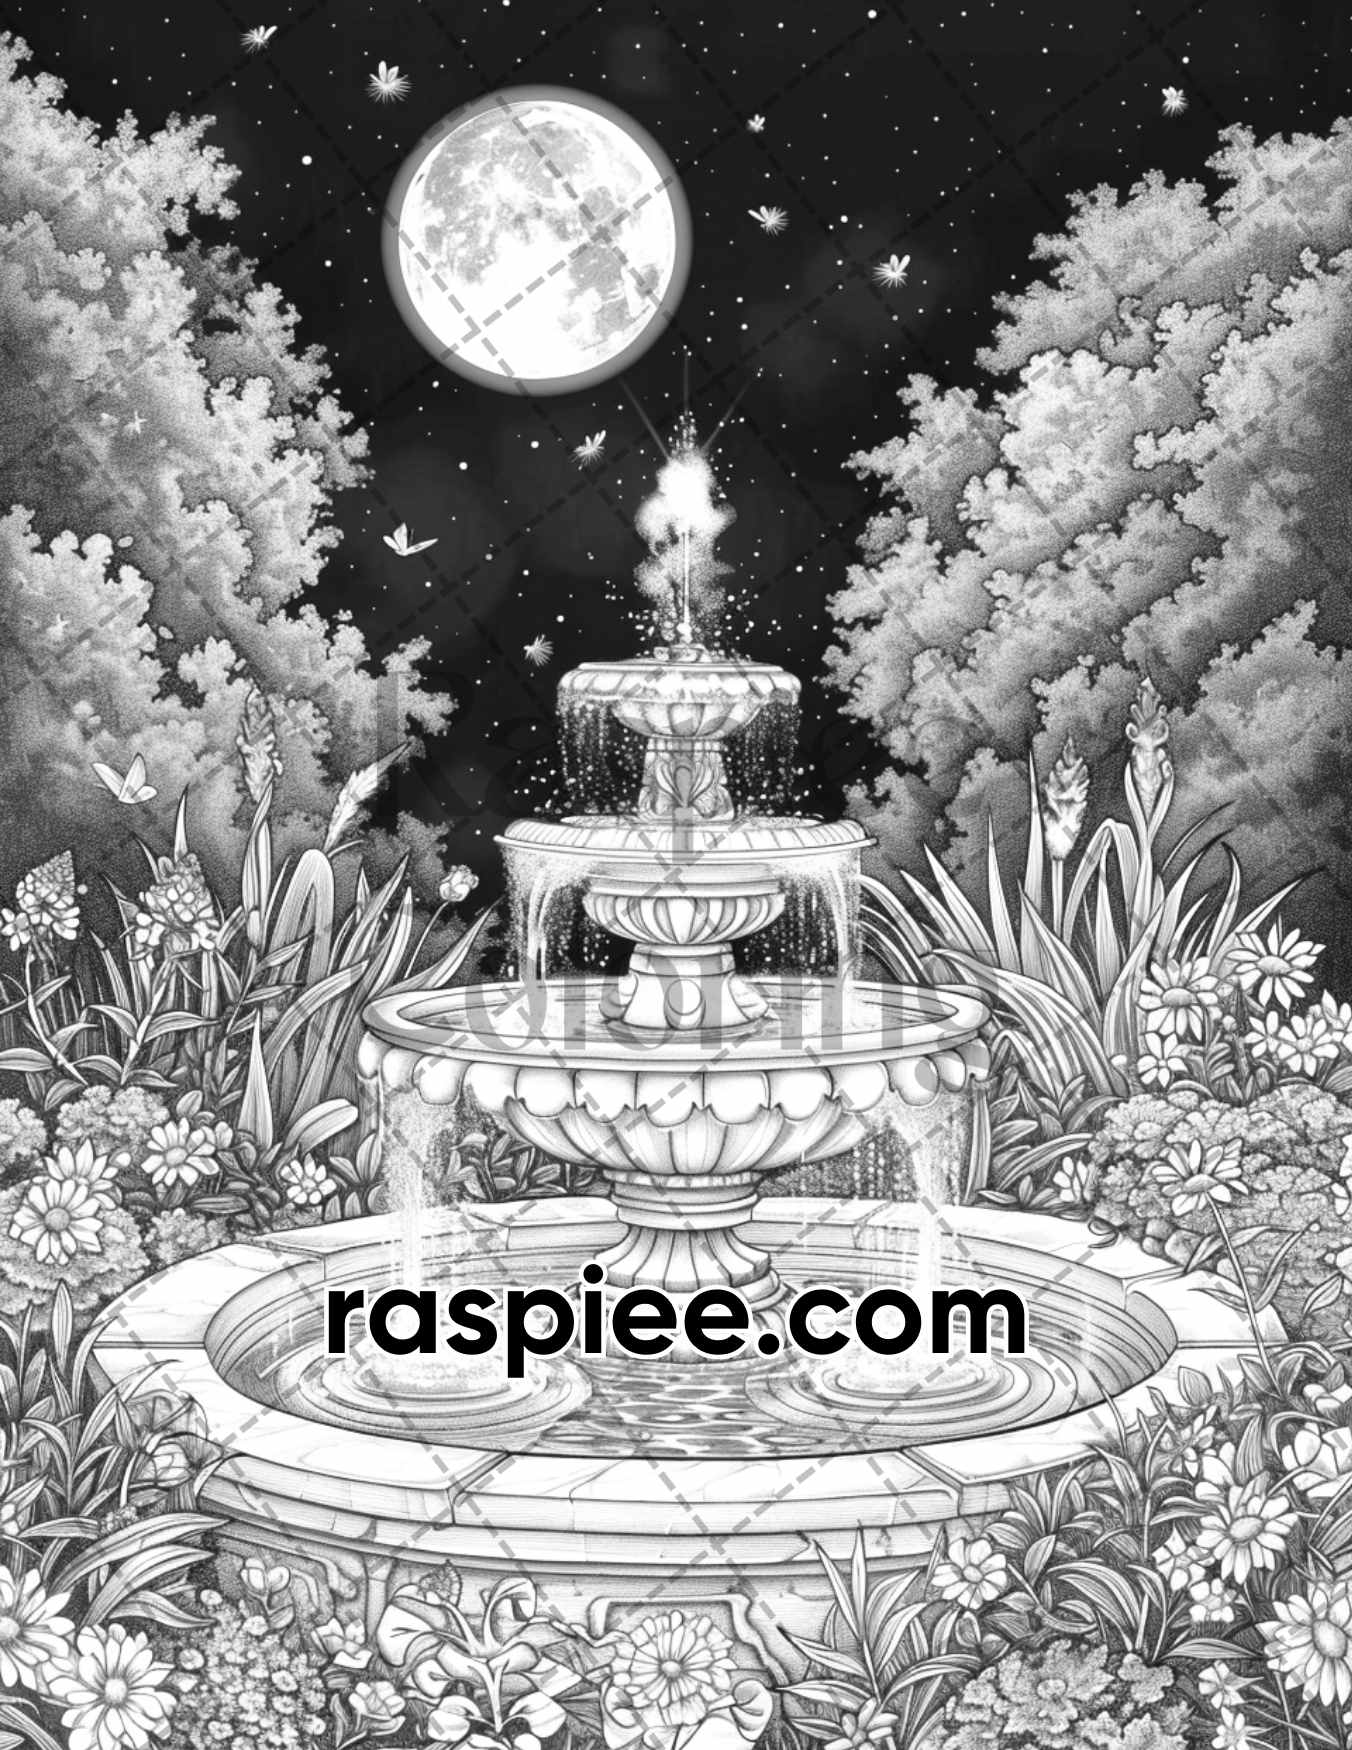 adult coloring pages, adult coloring sheets, adult coloring book pdf, adult coloring book printable, grayscale coloring pages, grayscale coloring books, grayscale illustration, Gorgeous Cottage Garden Grayscale Adult Coloring Pages